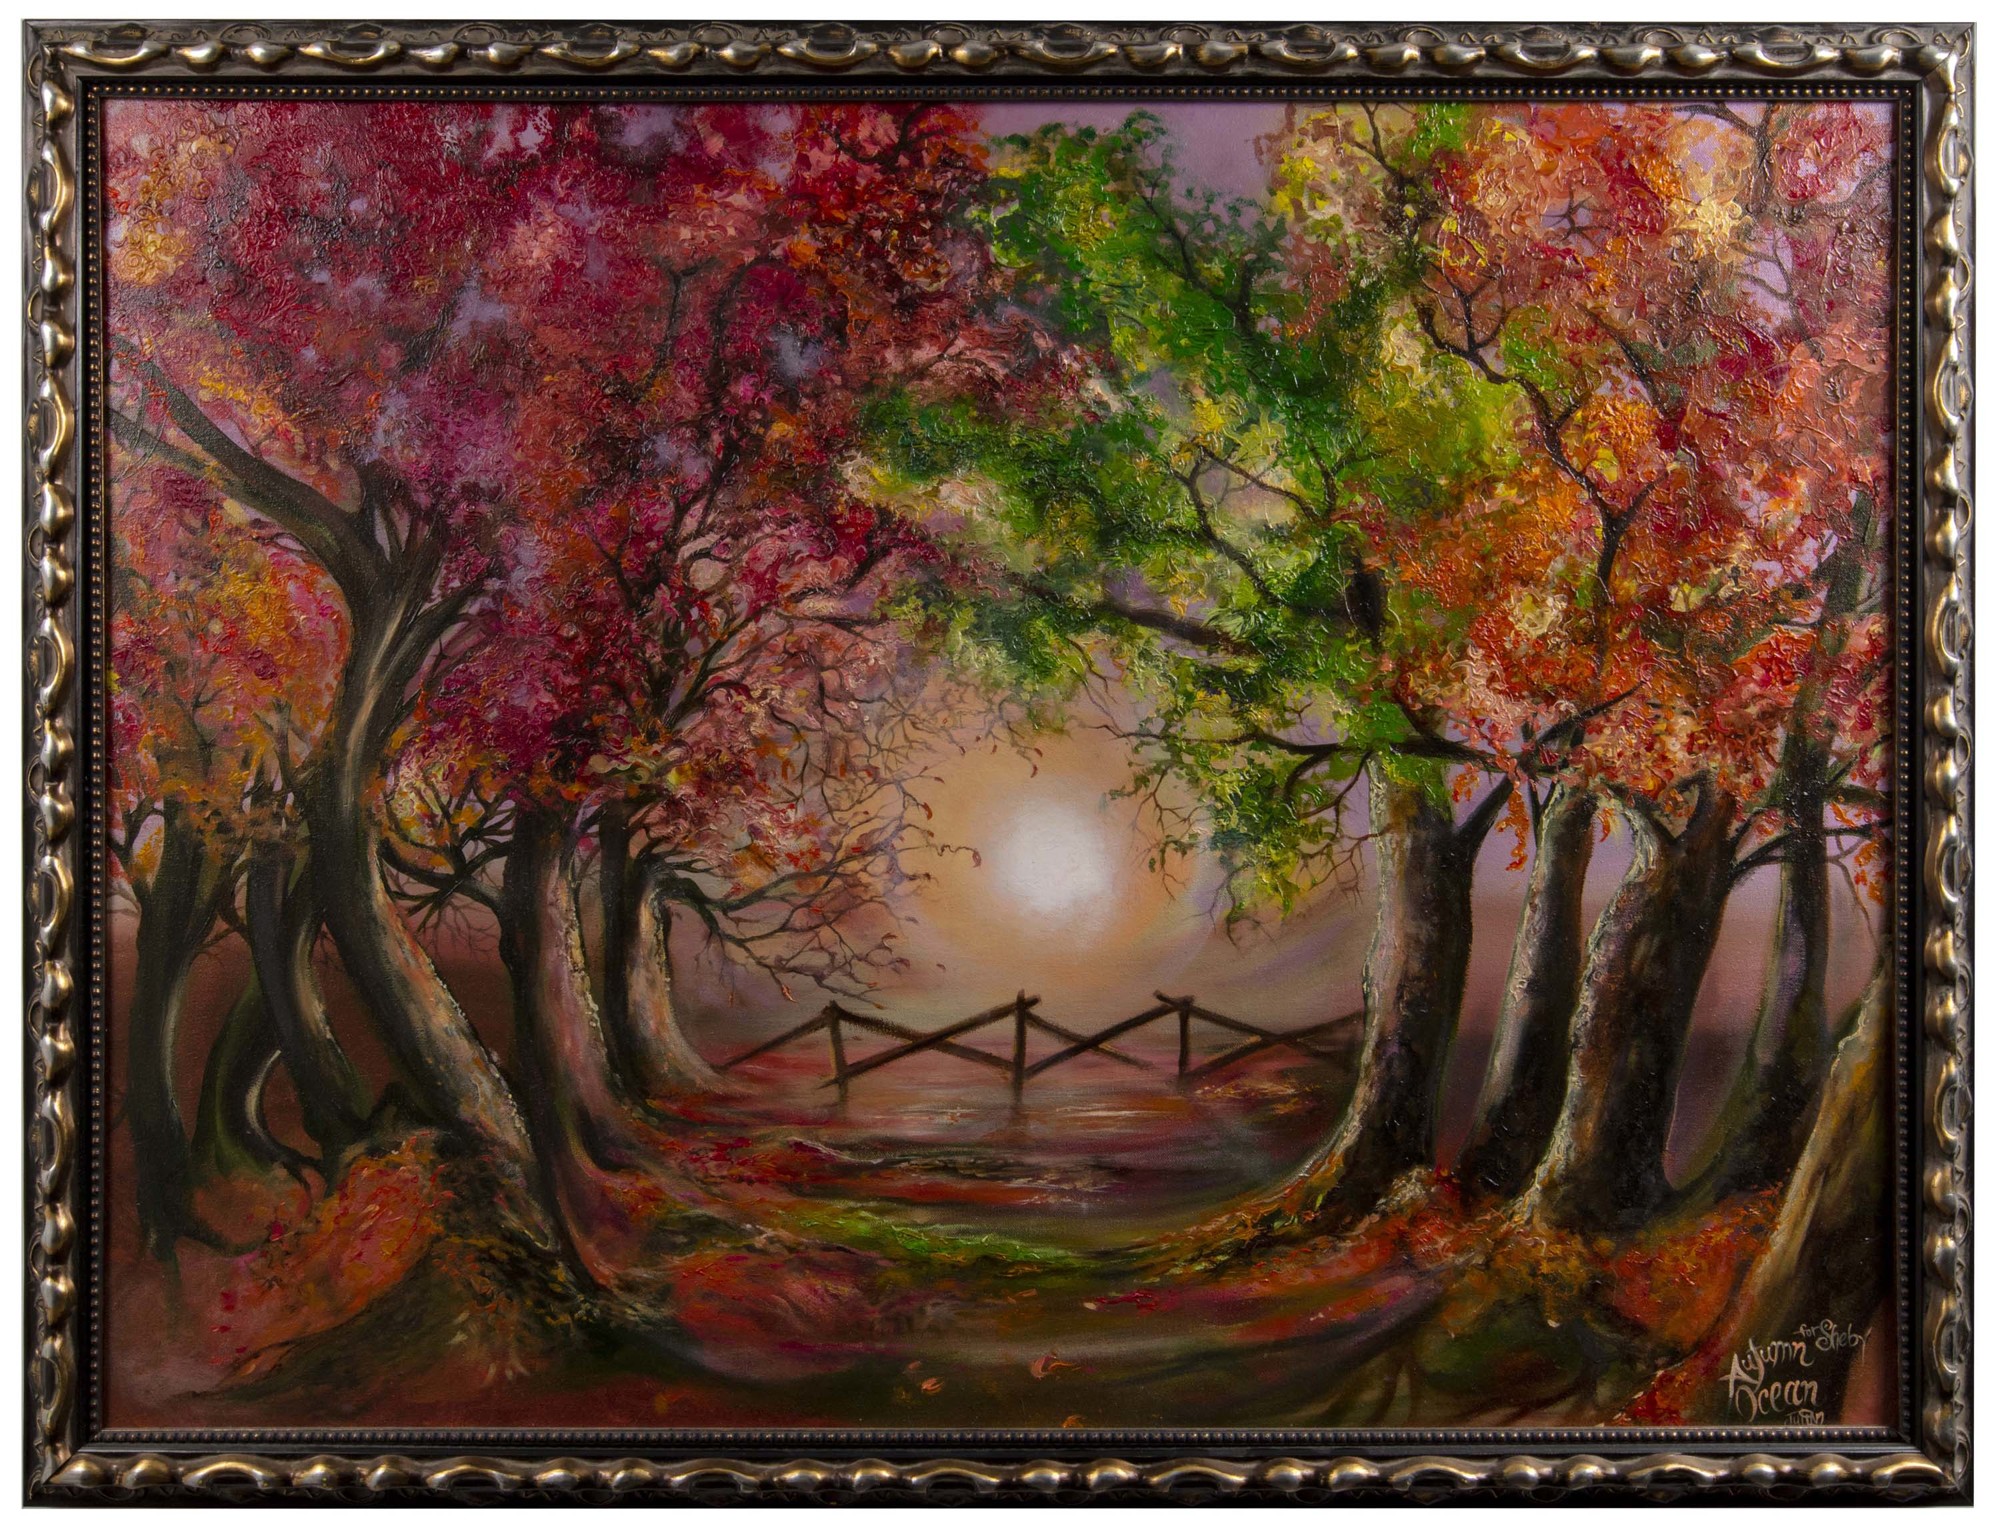 “Autumn,” by Julian Johnson, will be on display at Frame of Mind Art Gallery during Ormond Beach Art Walk. Courtesy photo